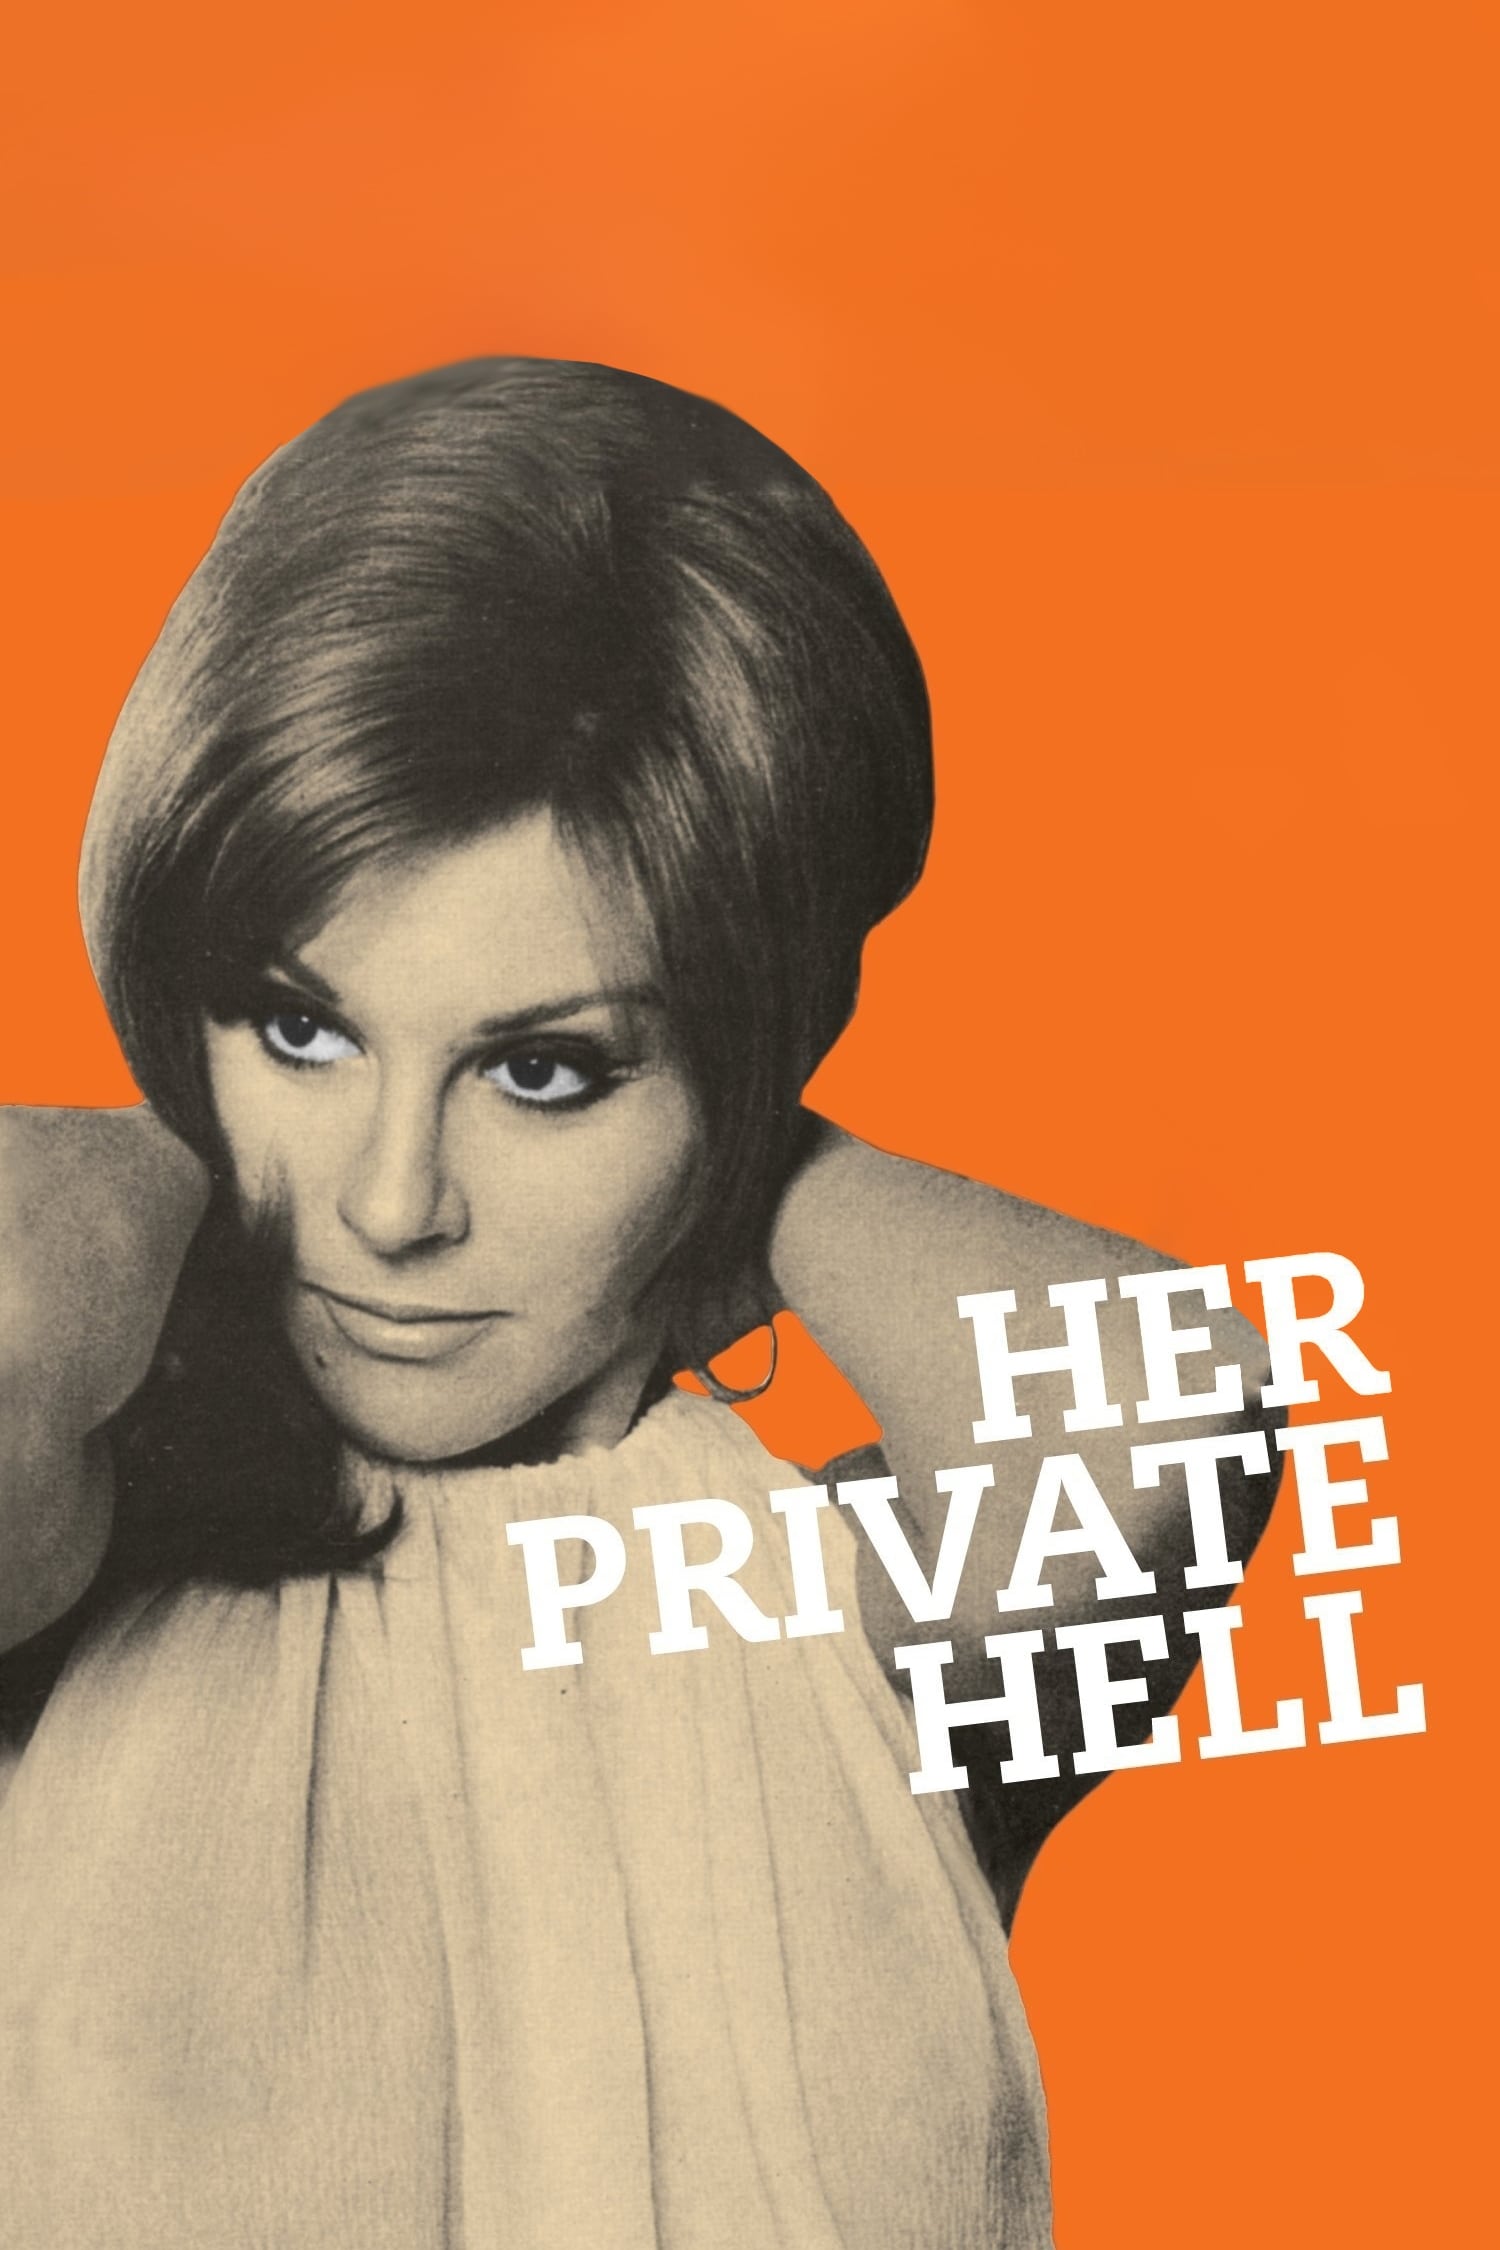 Caratula de Her Private Hell (Her Private Hell) 